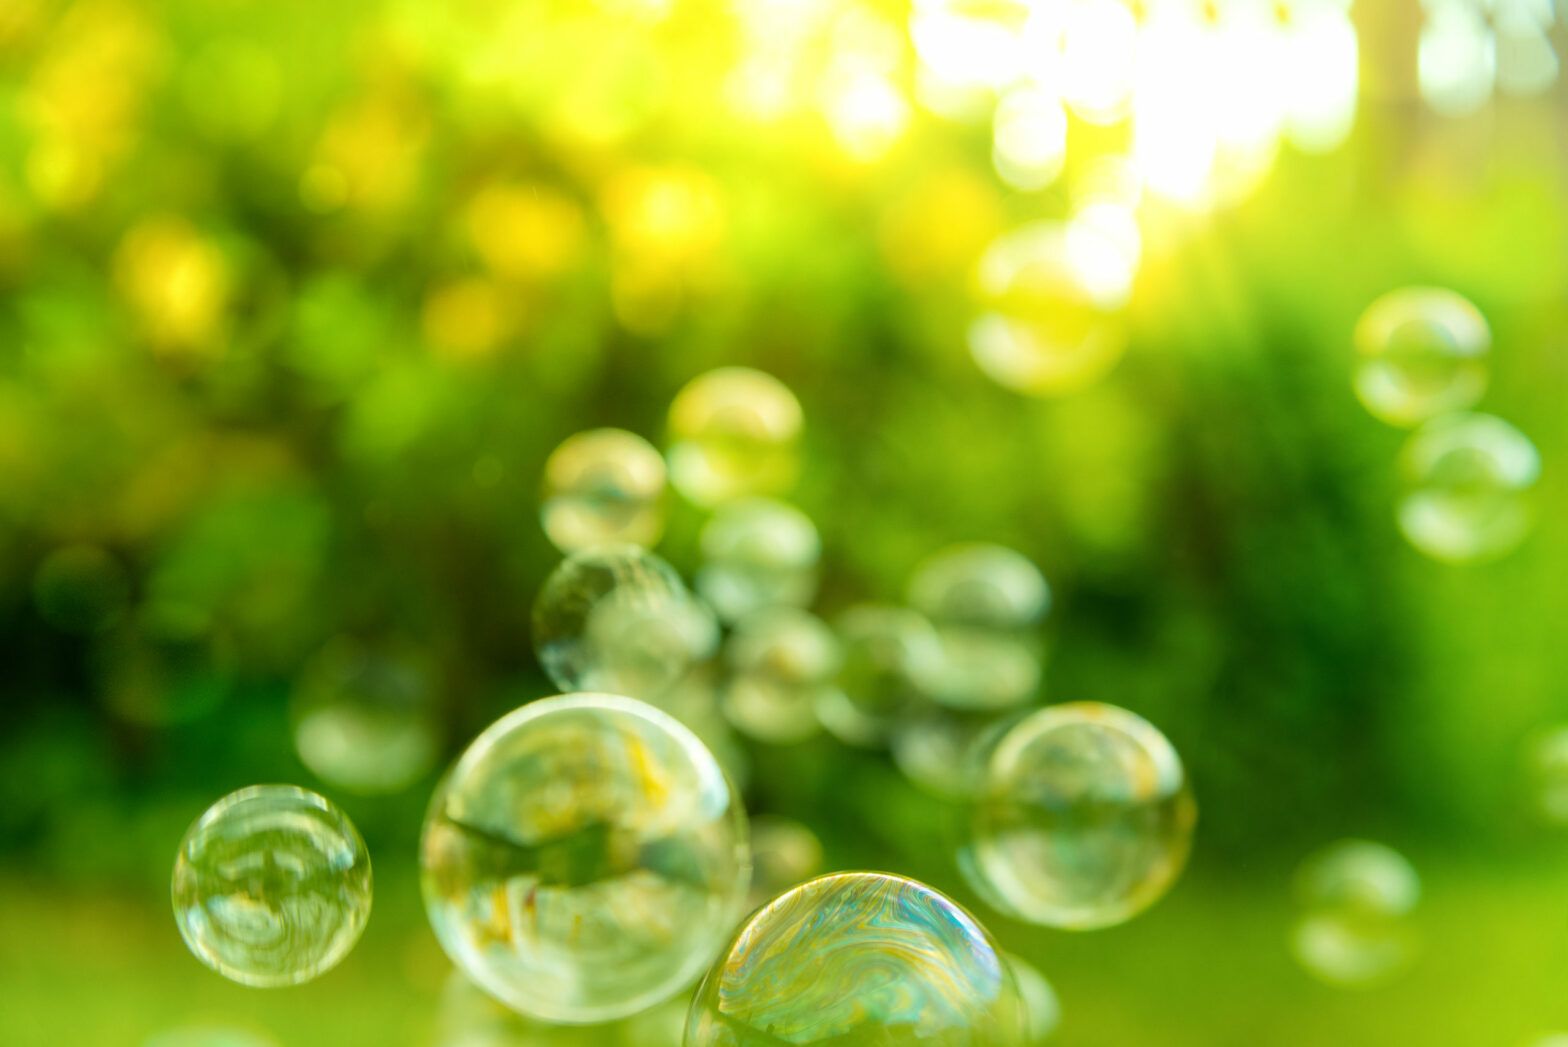 Global ESG Summit: Green tech bubbles help clean up climate